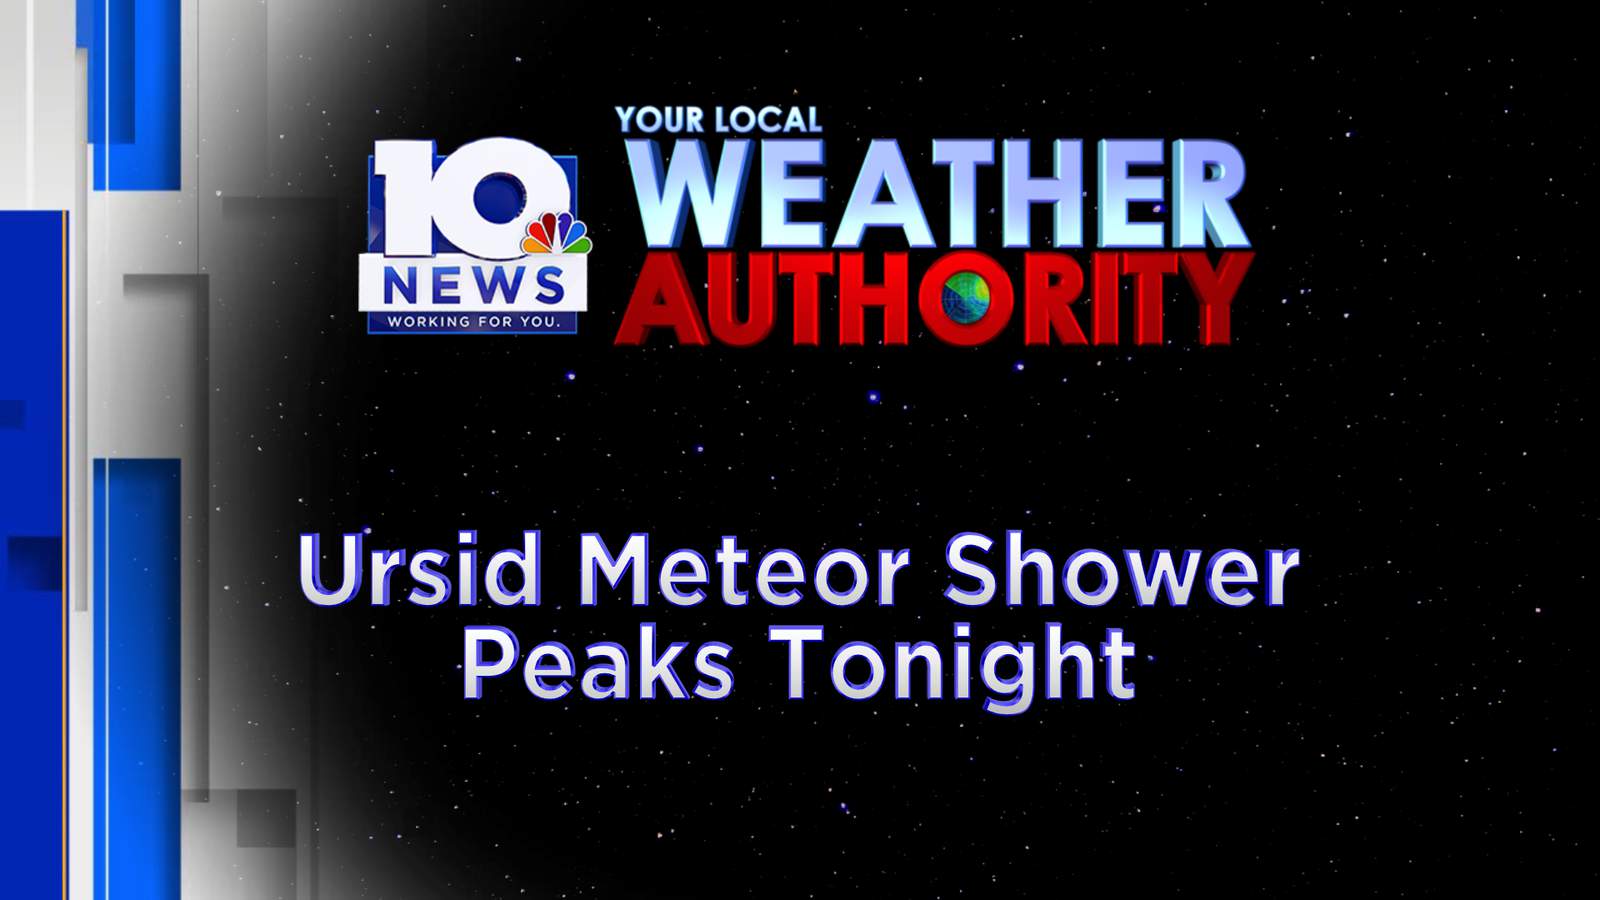 Beyond The Forecast: A minor meteor shower peaks tonight, will you be able to see it?